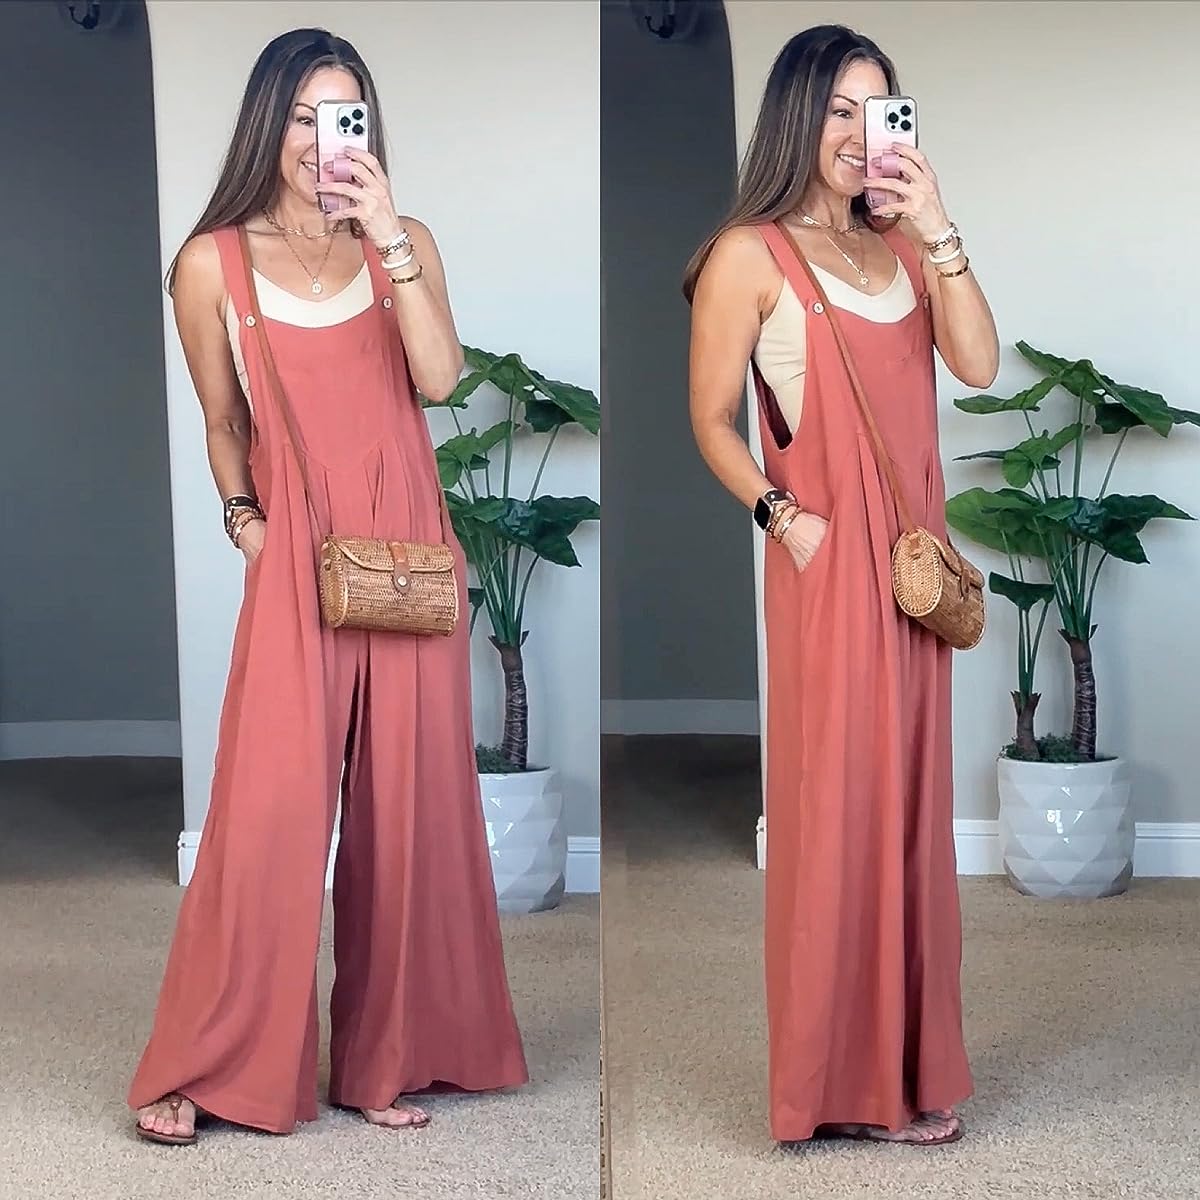 Gorgeous Jumper for Fall | #fall #fashion #summer #casual #romper #jumpsuit #overalls #purse #sandals #amazon #buttons #selfie #toryburch #goldjewelry